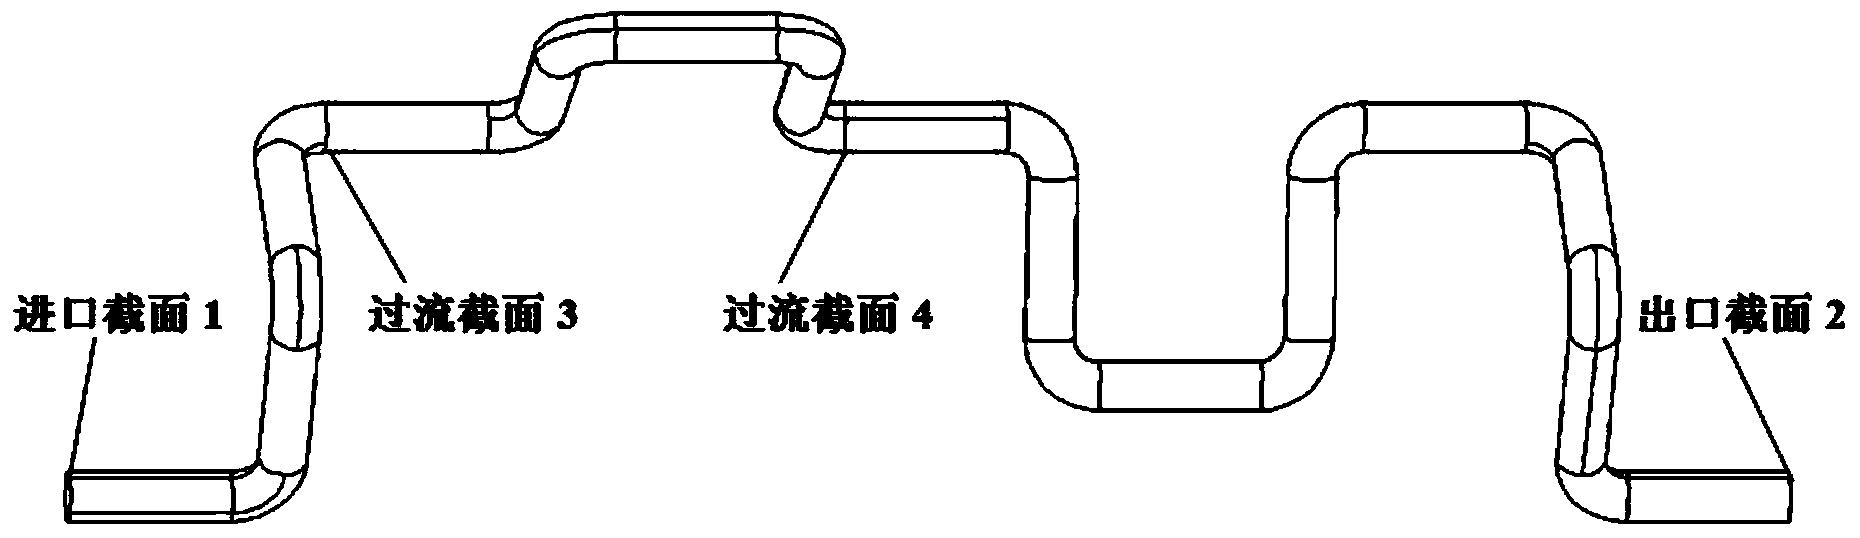 Accurate computing method used for pipeline resistance coefficient and based on numerical computation